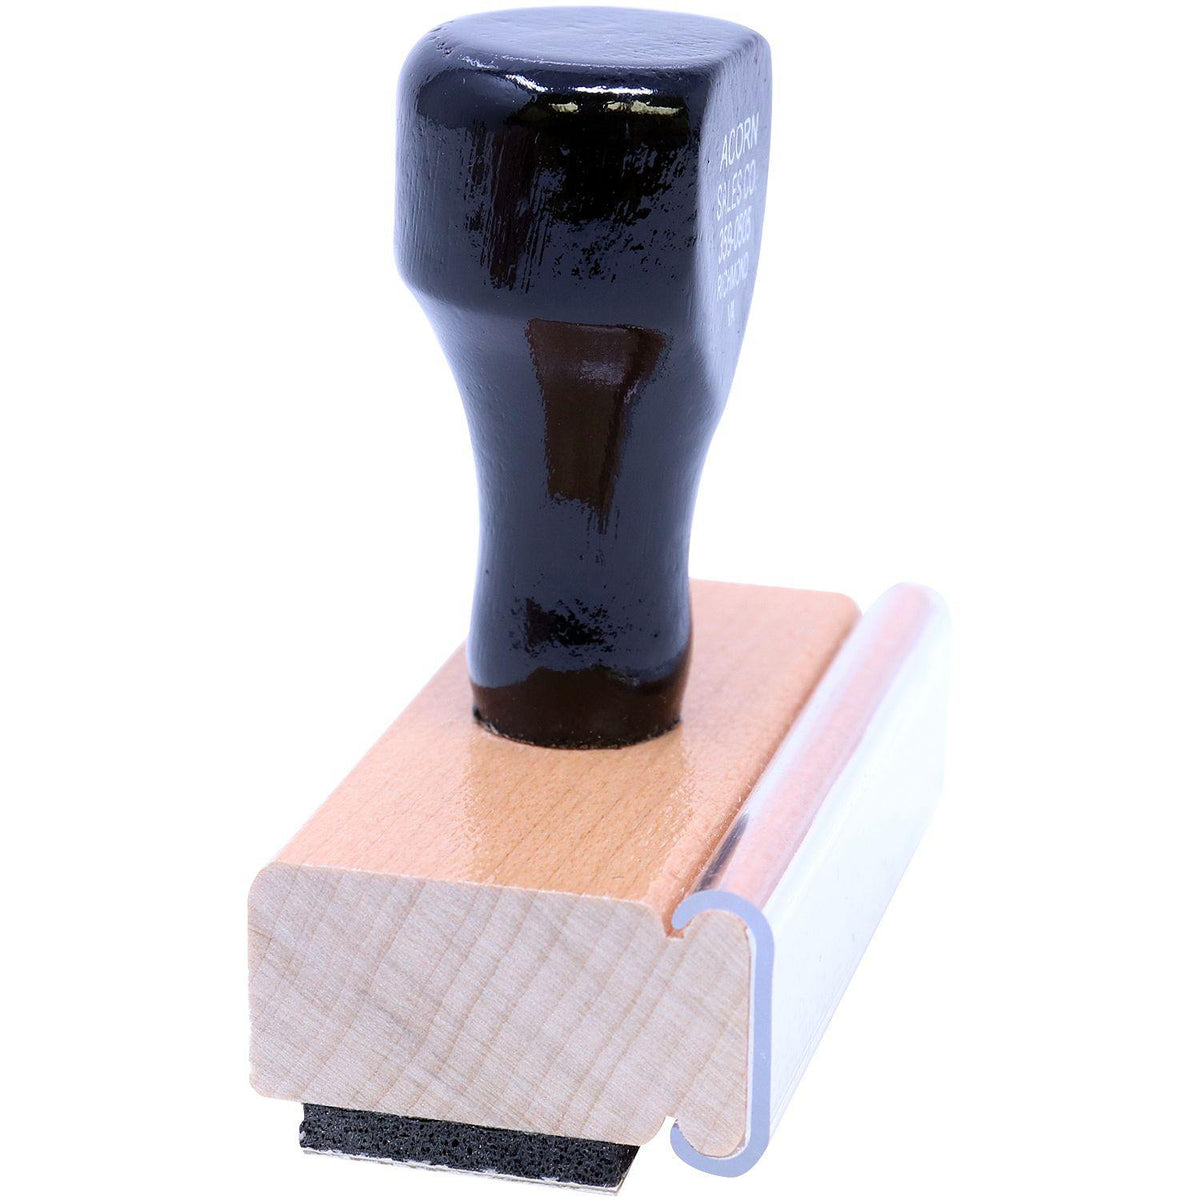 Side View of Large Please Finish Rubber Stamp at an Angle